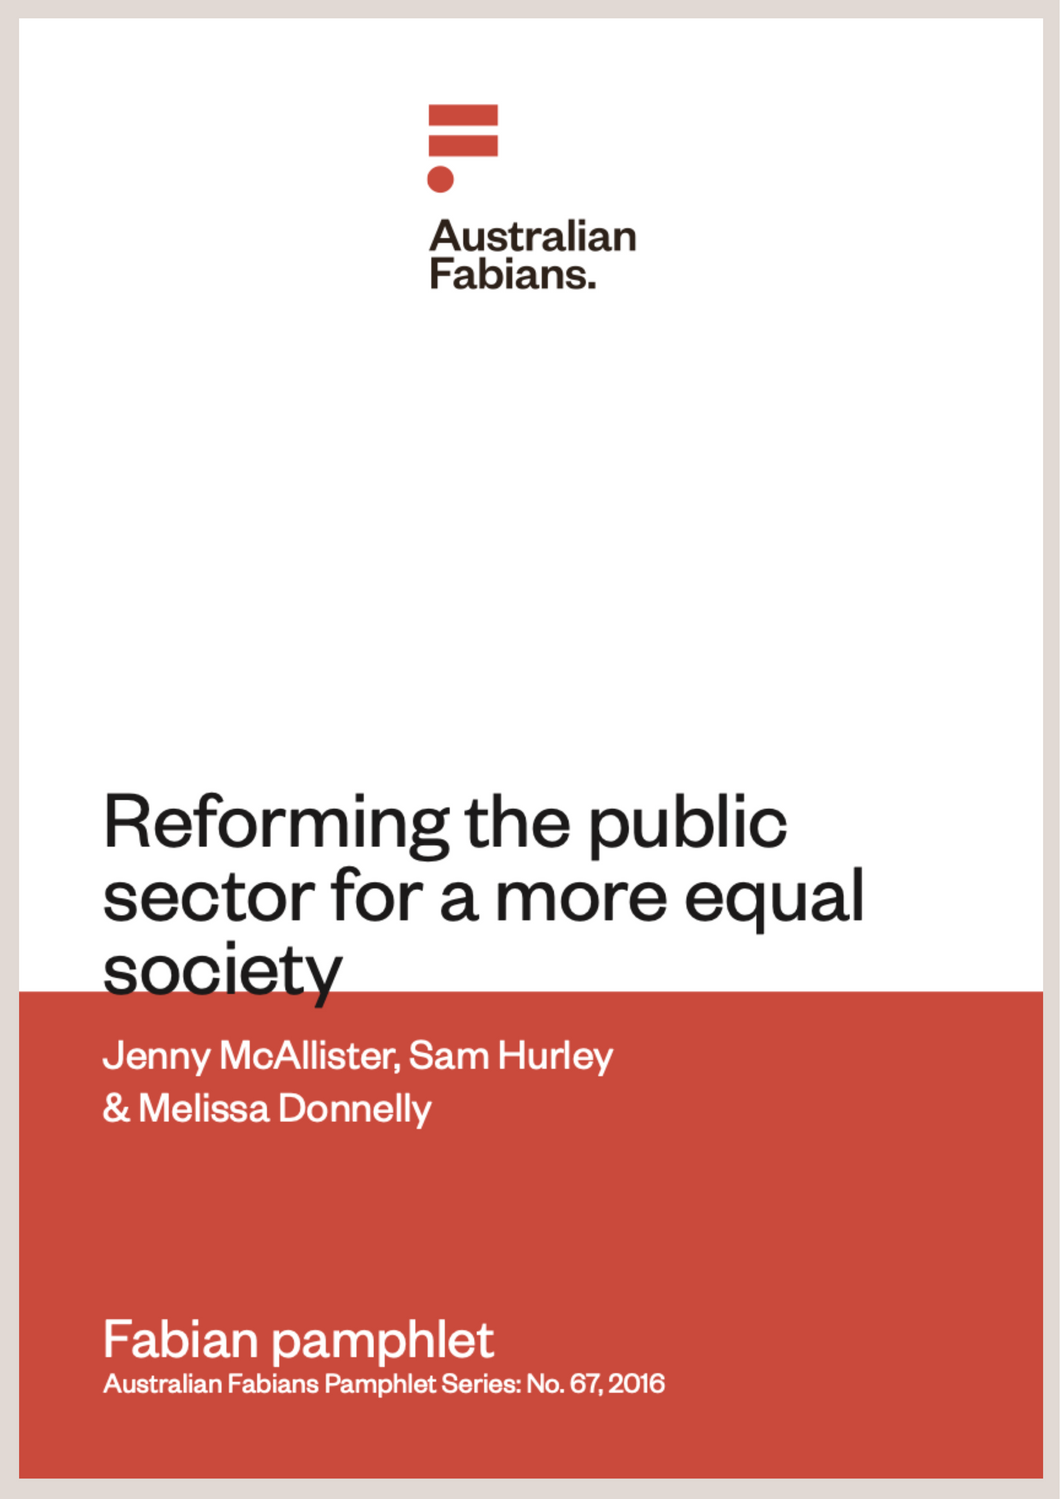 Fabians Pamphlet 67: Reforming the public sector for a more equal society